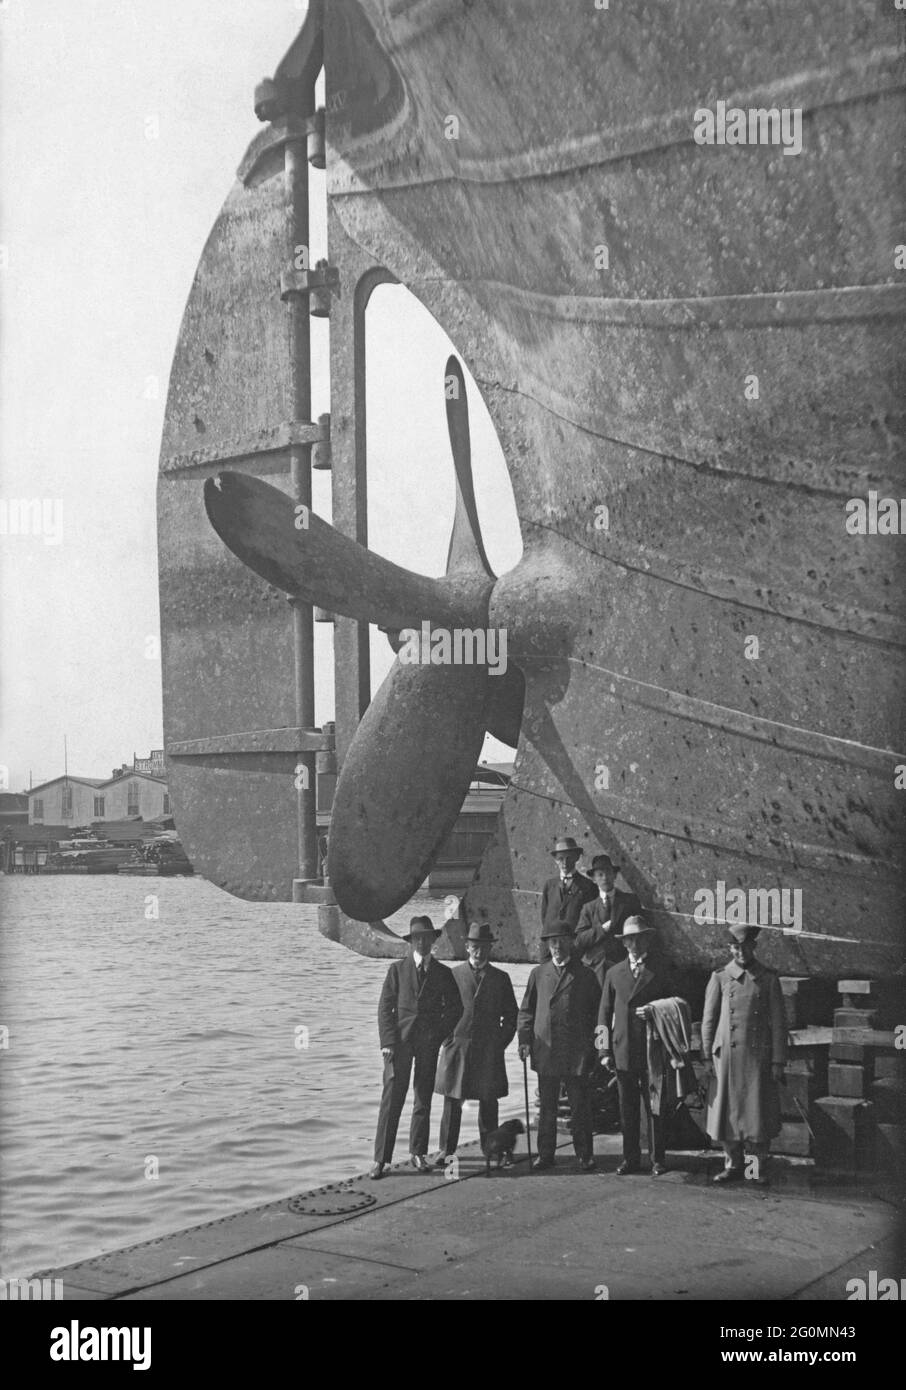 Dockyard in the 1920s. A ship is undergoing maintance and the ship is risen in a dry dock. One of the stern the propeller is visible and a it's size can be measured by comparing it to the people standing below it. Picture taken at Götaverken shipyard in Gothenburg Sweden in the 1920s. Stock Photo